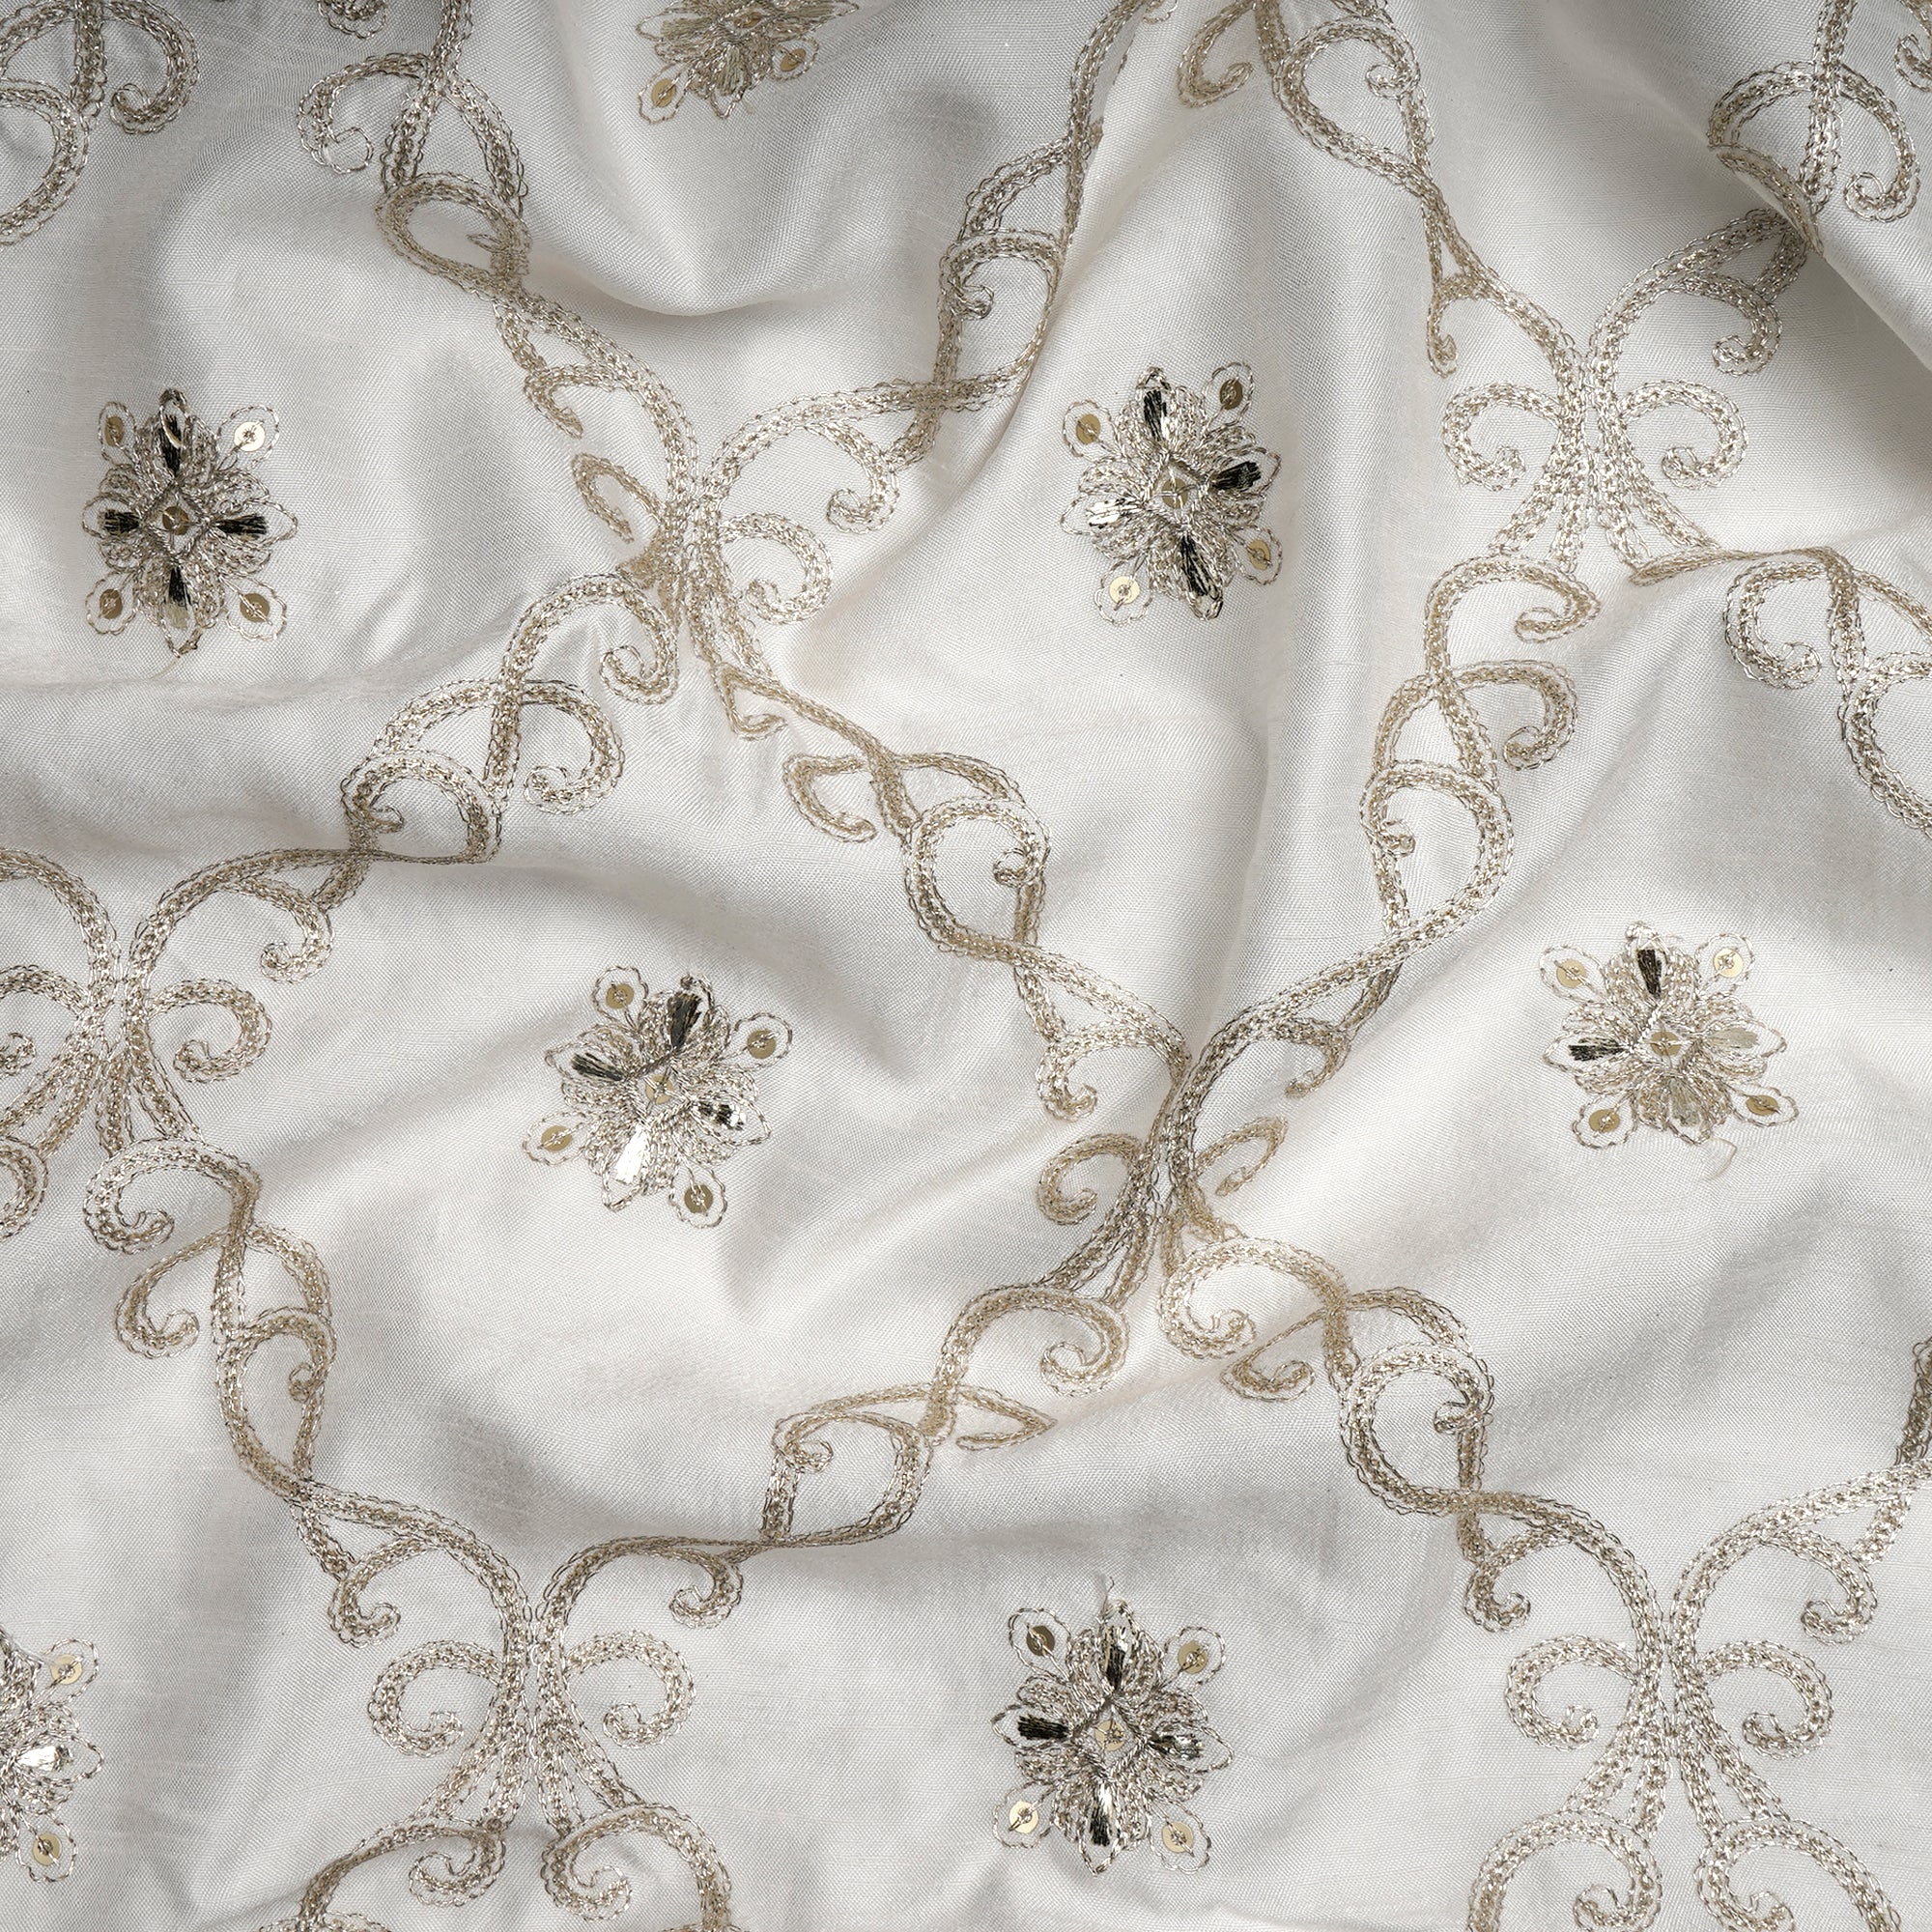 White Dyeable All Over Pattern Jari & Sequins Embroidered Viscose Satin Dupion Fabric